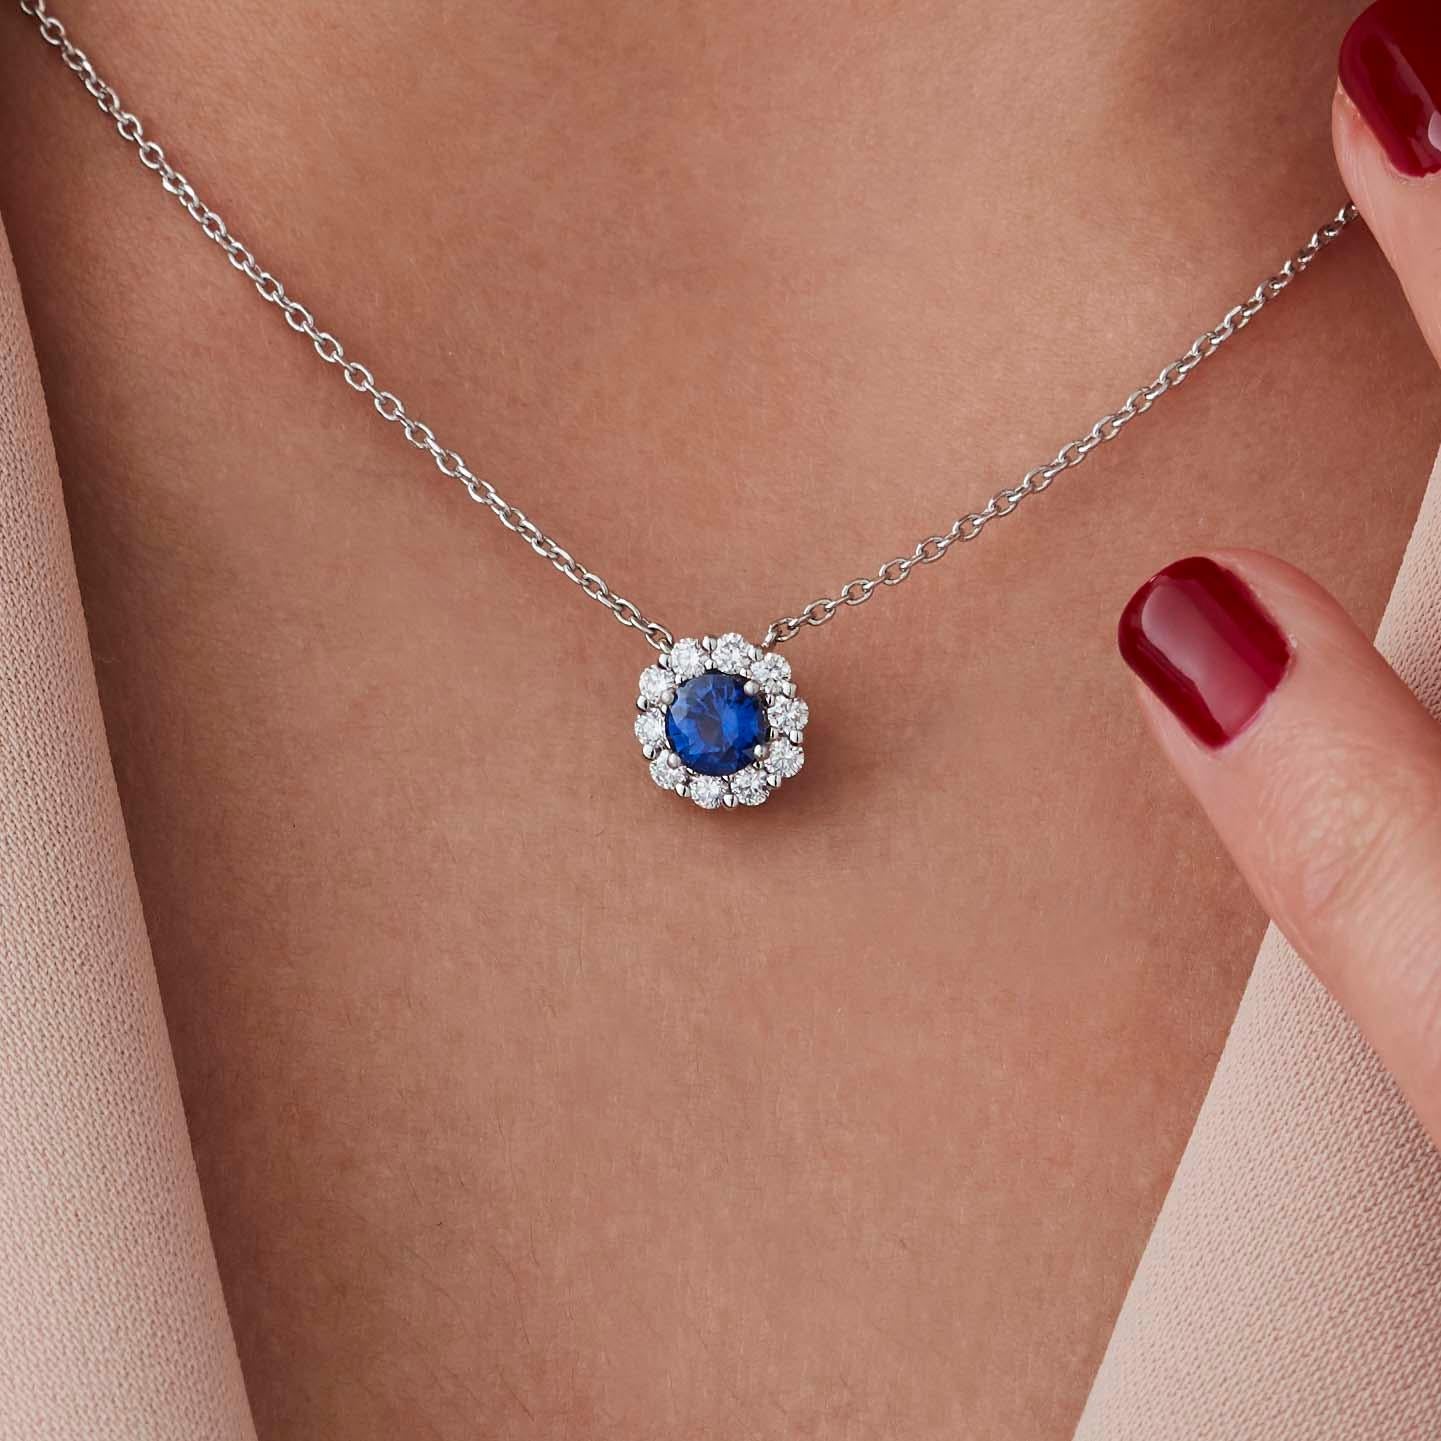 A House of Garrard platinum pendant from the 'Garrard 1735' collection, set with a central round blue sapphire and round white diamonds.

10 round white diamonds weighing: 0.35cts
1 round blue sapphire weighing: 0.54cts
GIA Certified,